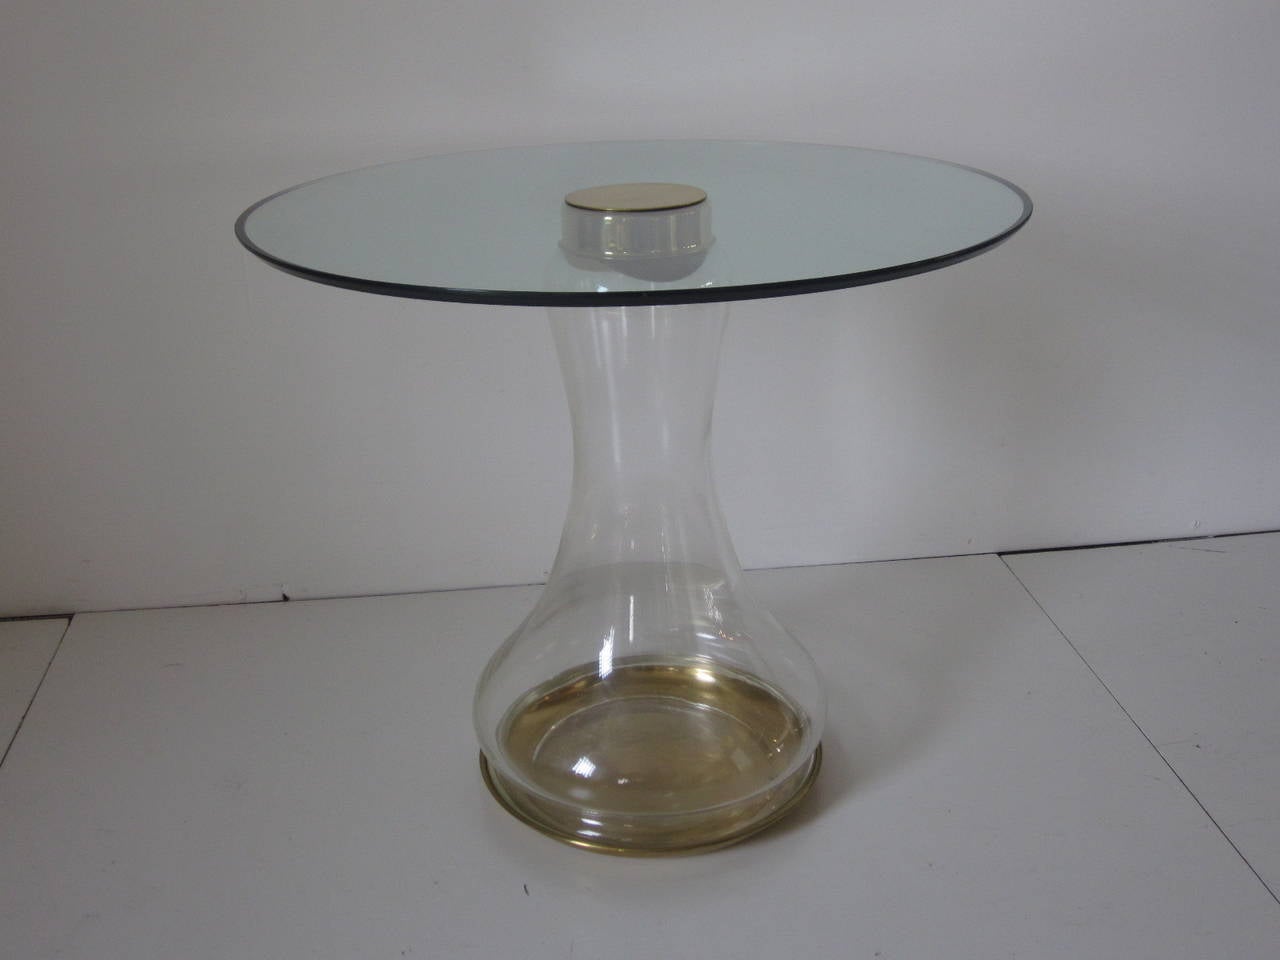 A handblown glass and brass based side table with screw on brass cap supporting a round beveled glass top. The base has a brass pan like tray for support which helps give the piece a rich and sculptural design aesthetic retaining labels made by